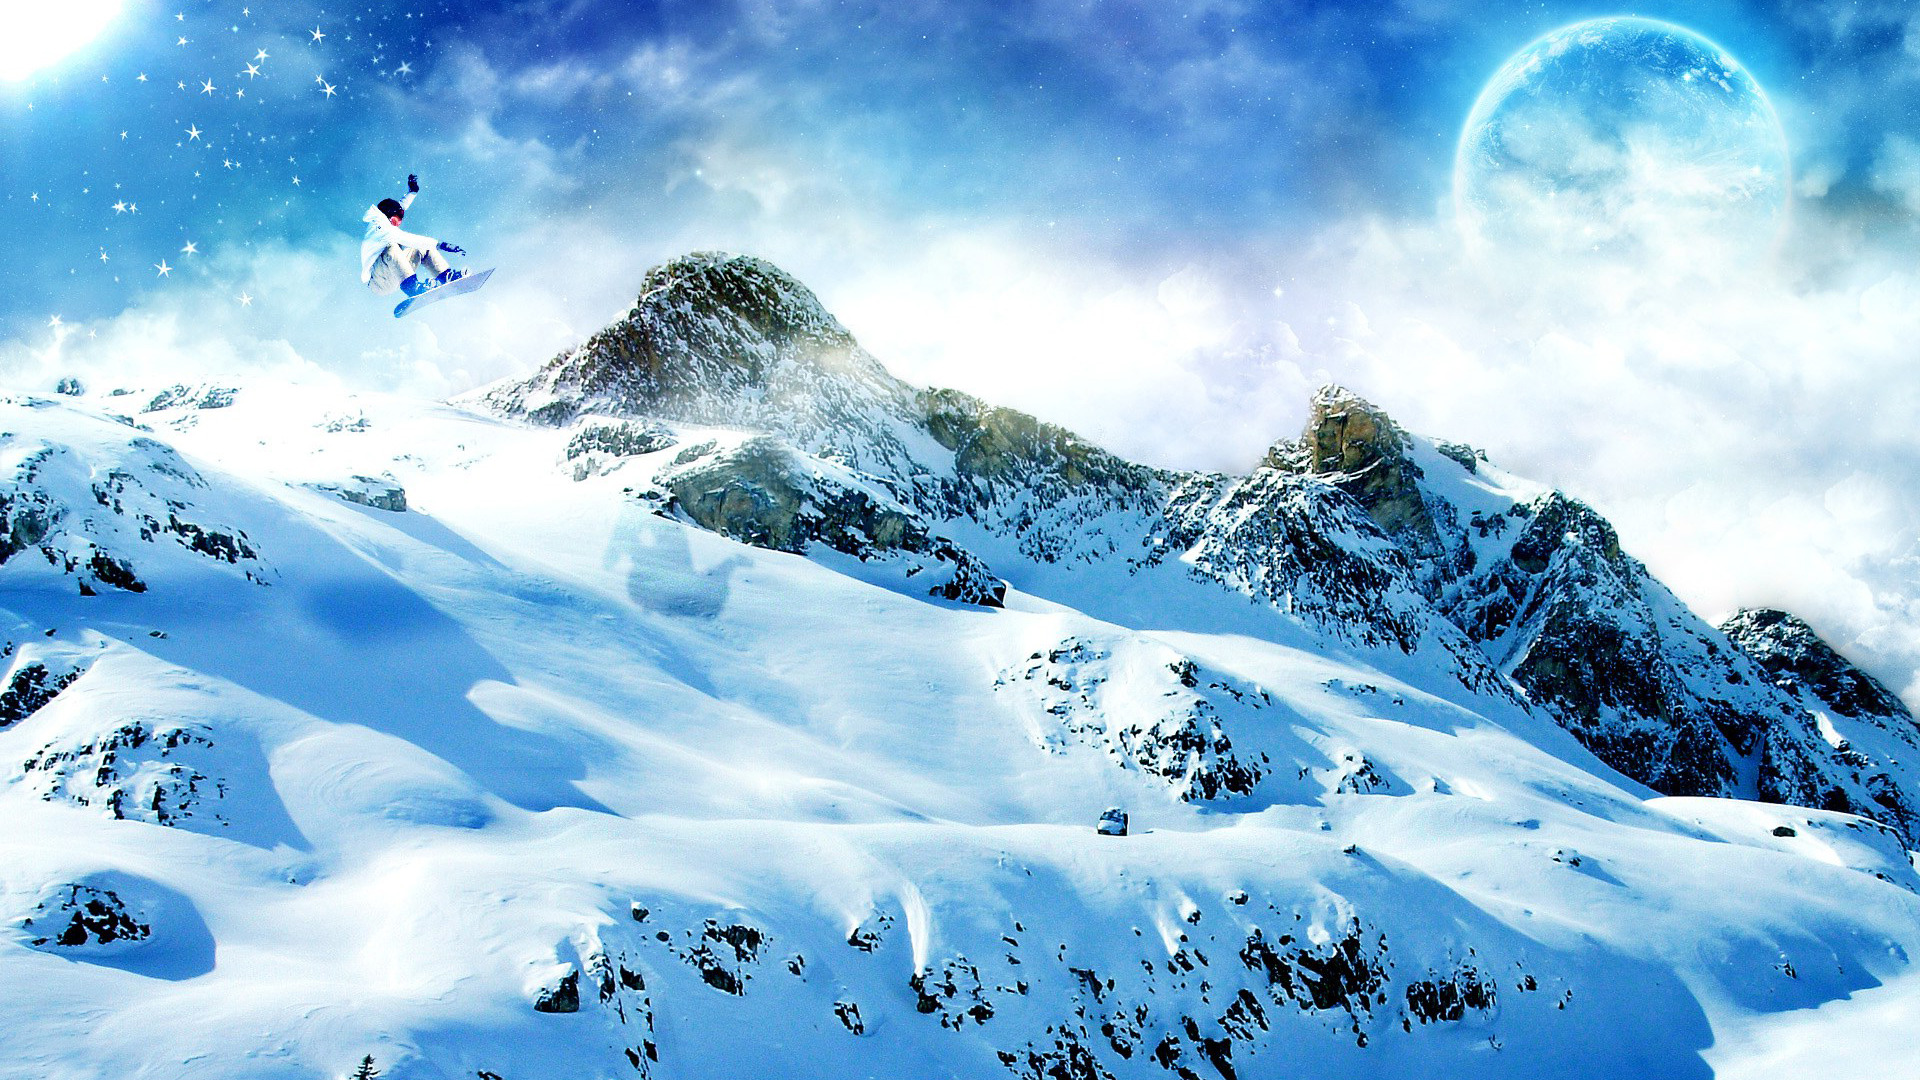  snowy mountains Wallpaper HD Wallpapers   High definition Wallpapers